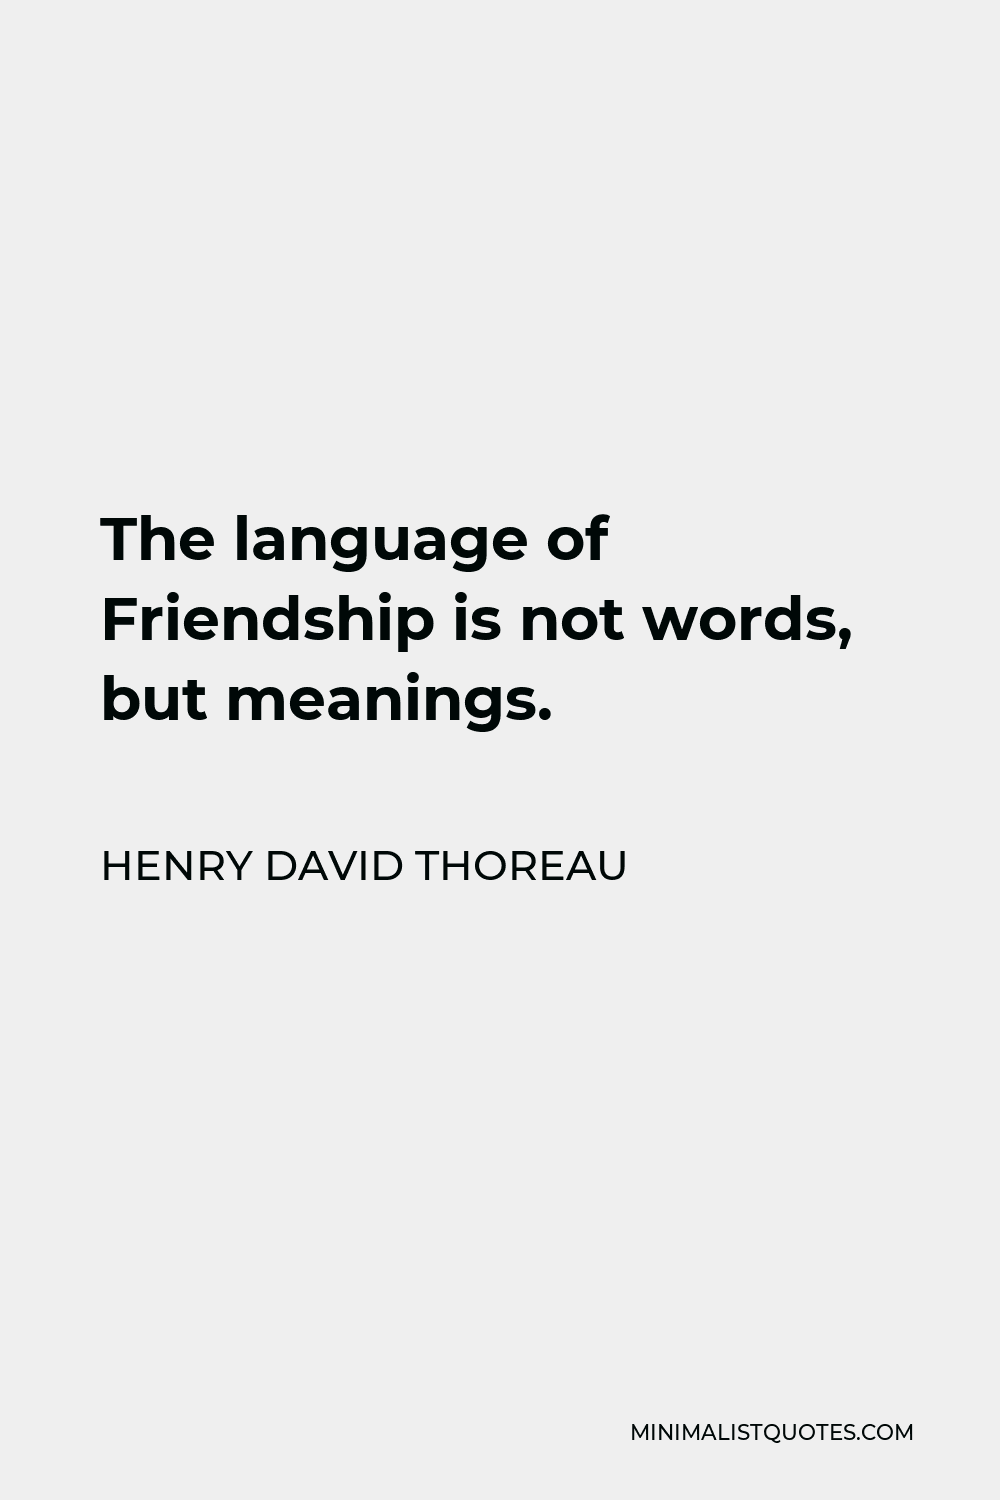 Henry David Thoreau Quote - The language of Friendship is not words, but meanings.